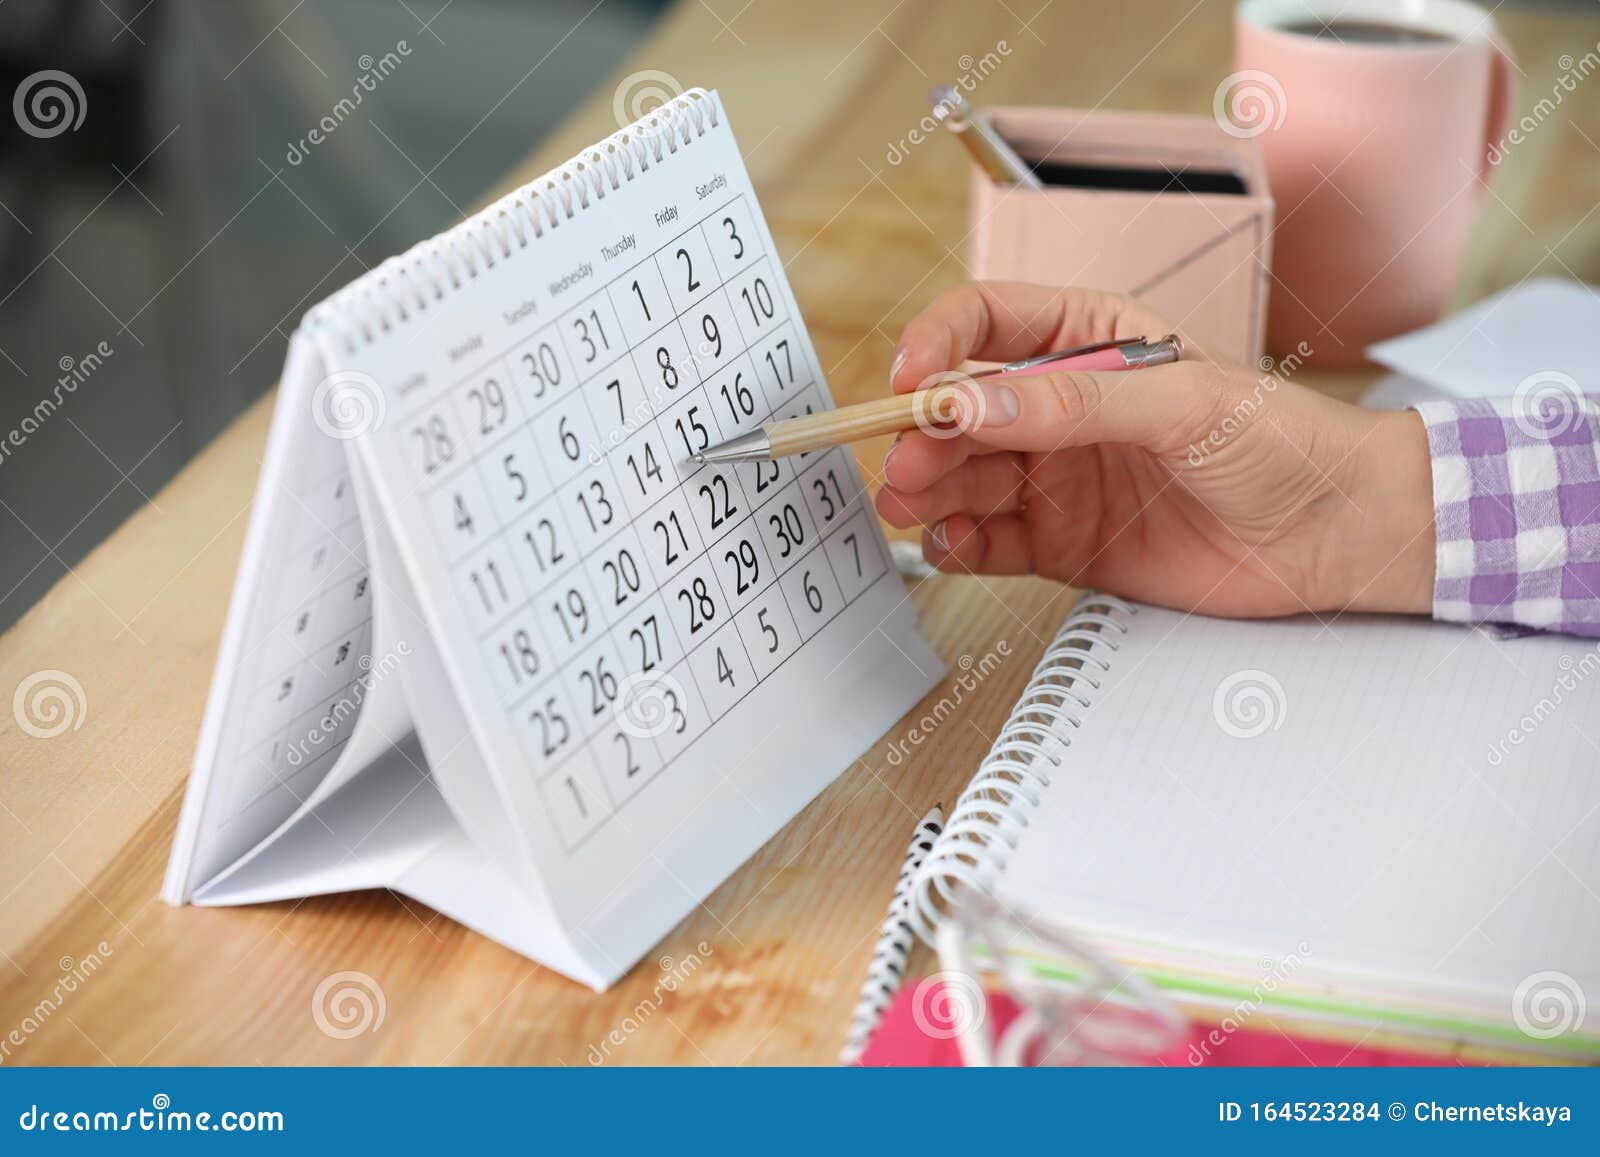 Woman Making Schedule Using Calendar At Table Stock Photo Image